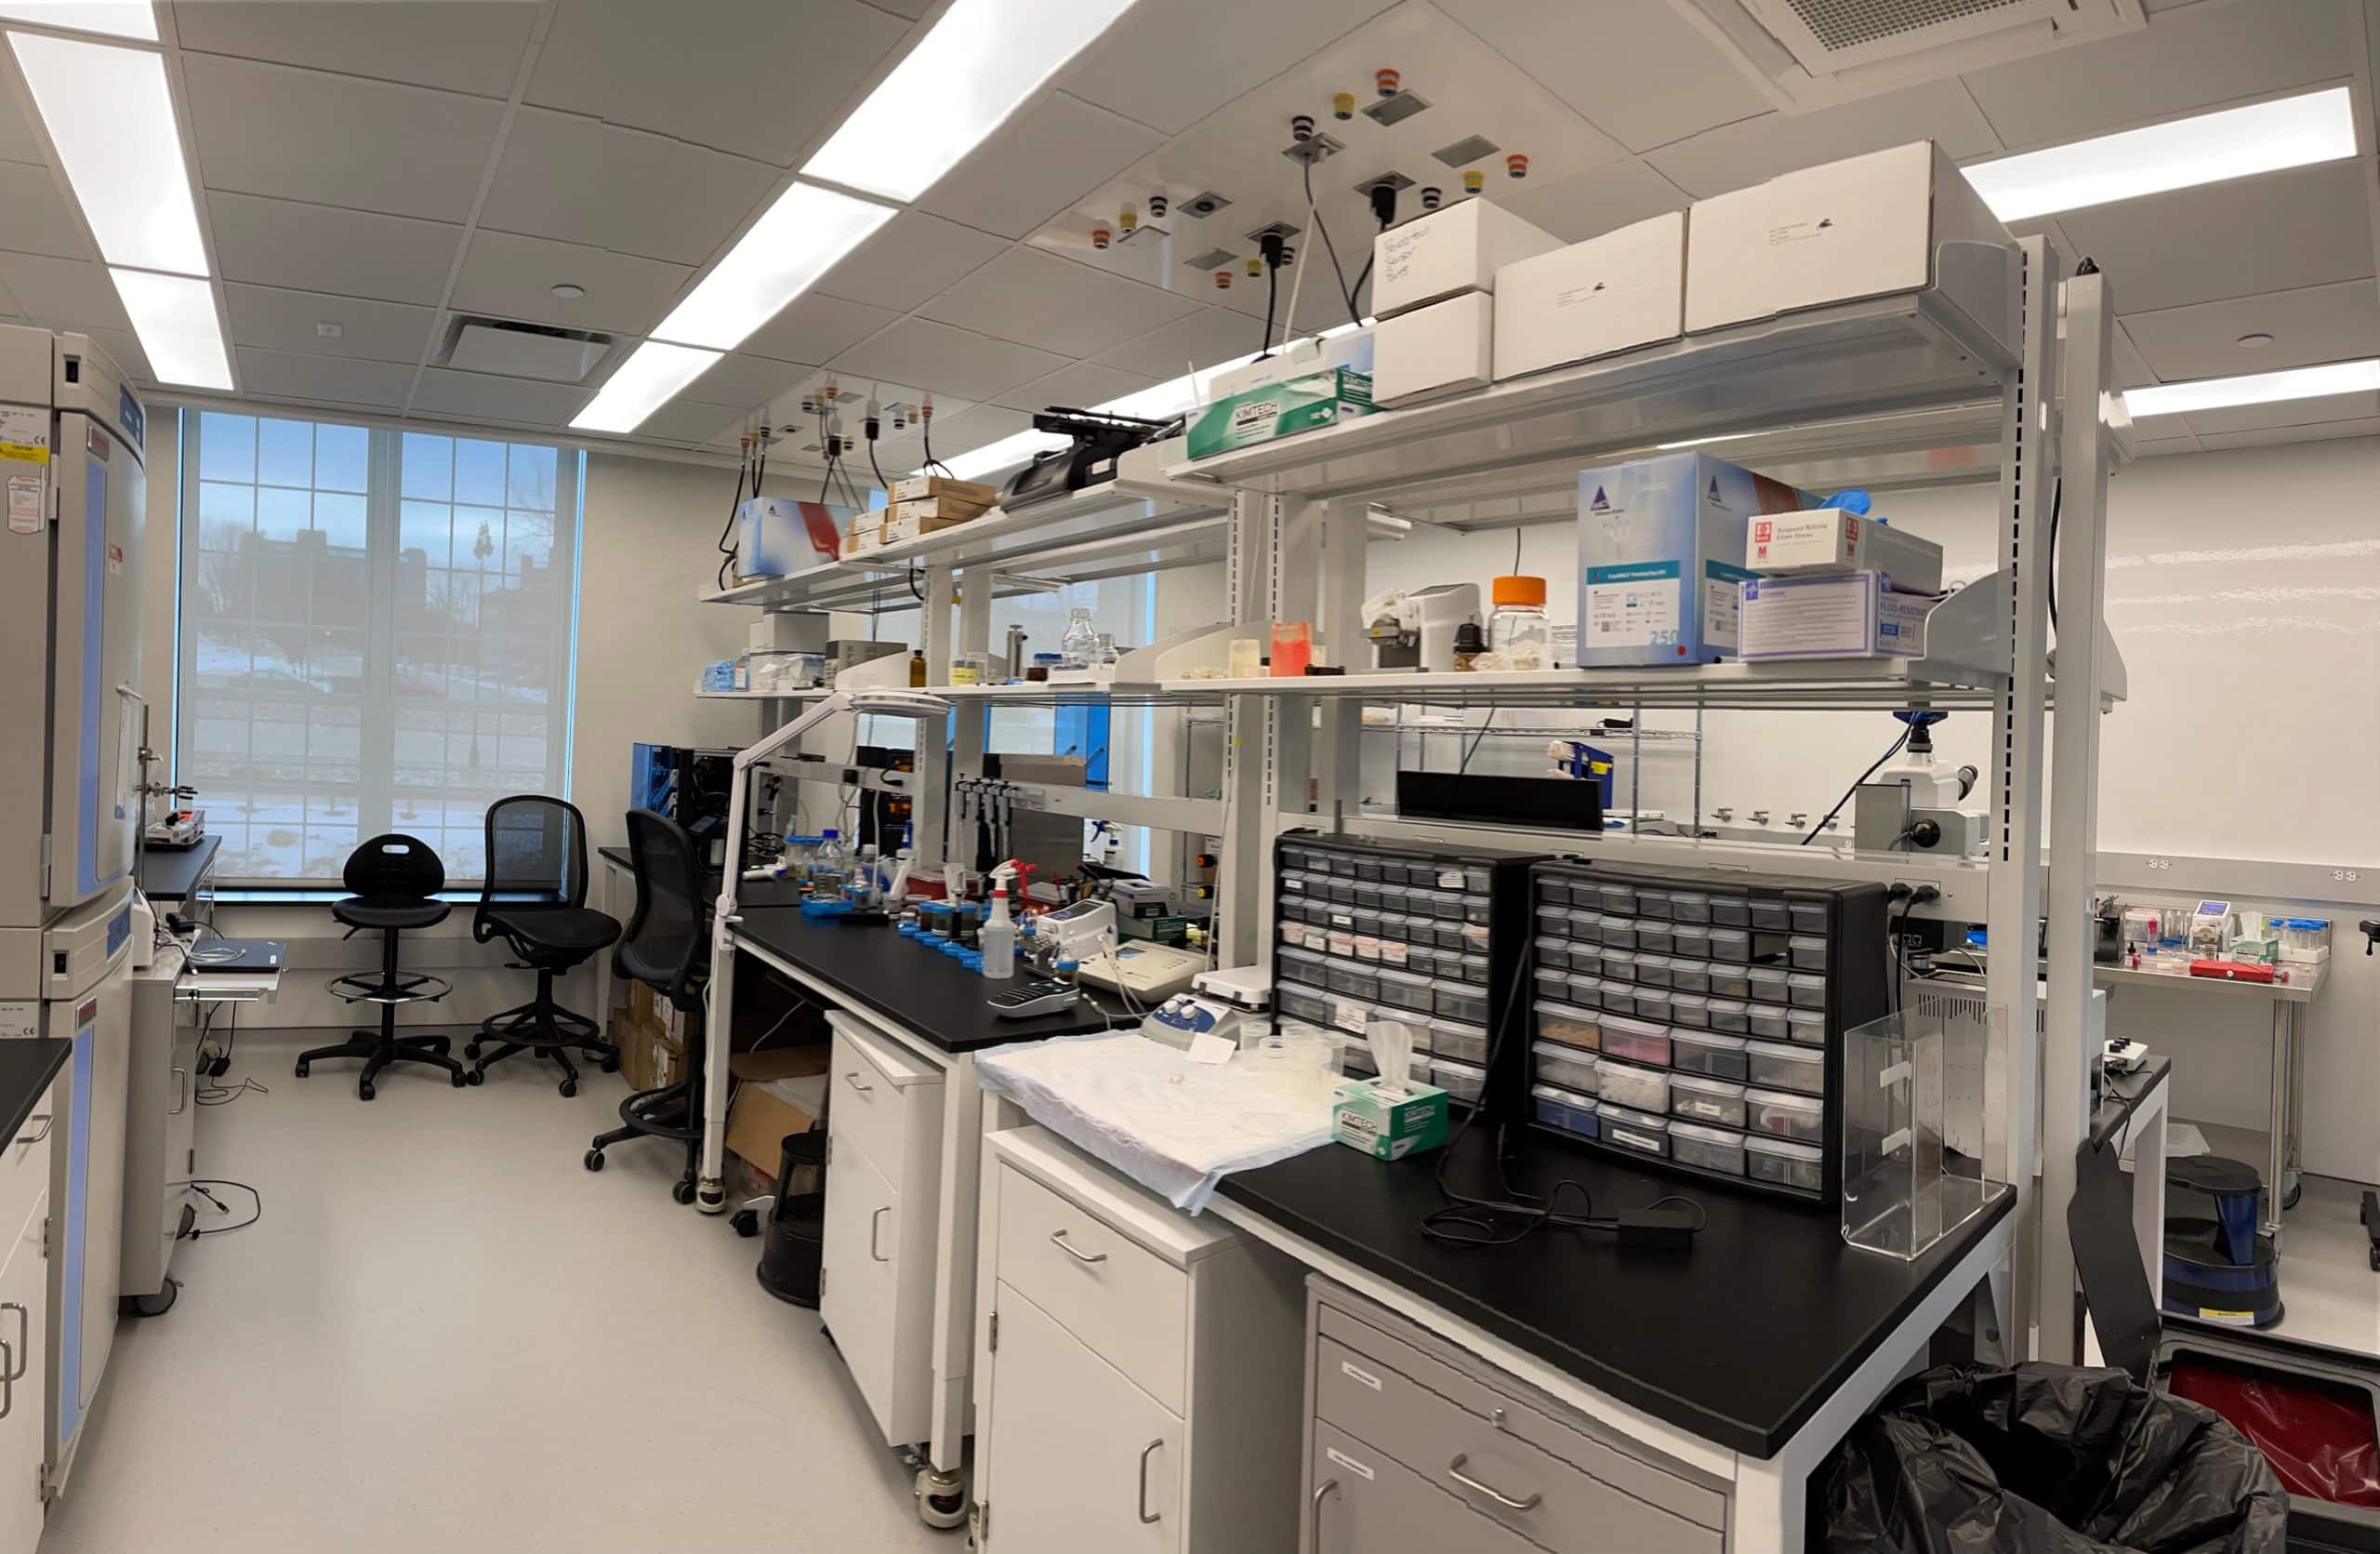 United Therapeutics Organ Manufacturing Group using Max Resistance 2 laboratory work surfaces from Fundermax